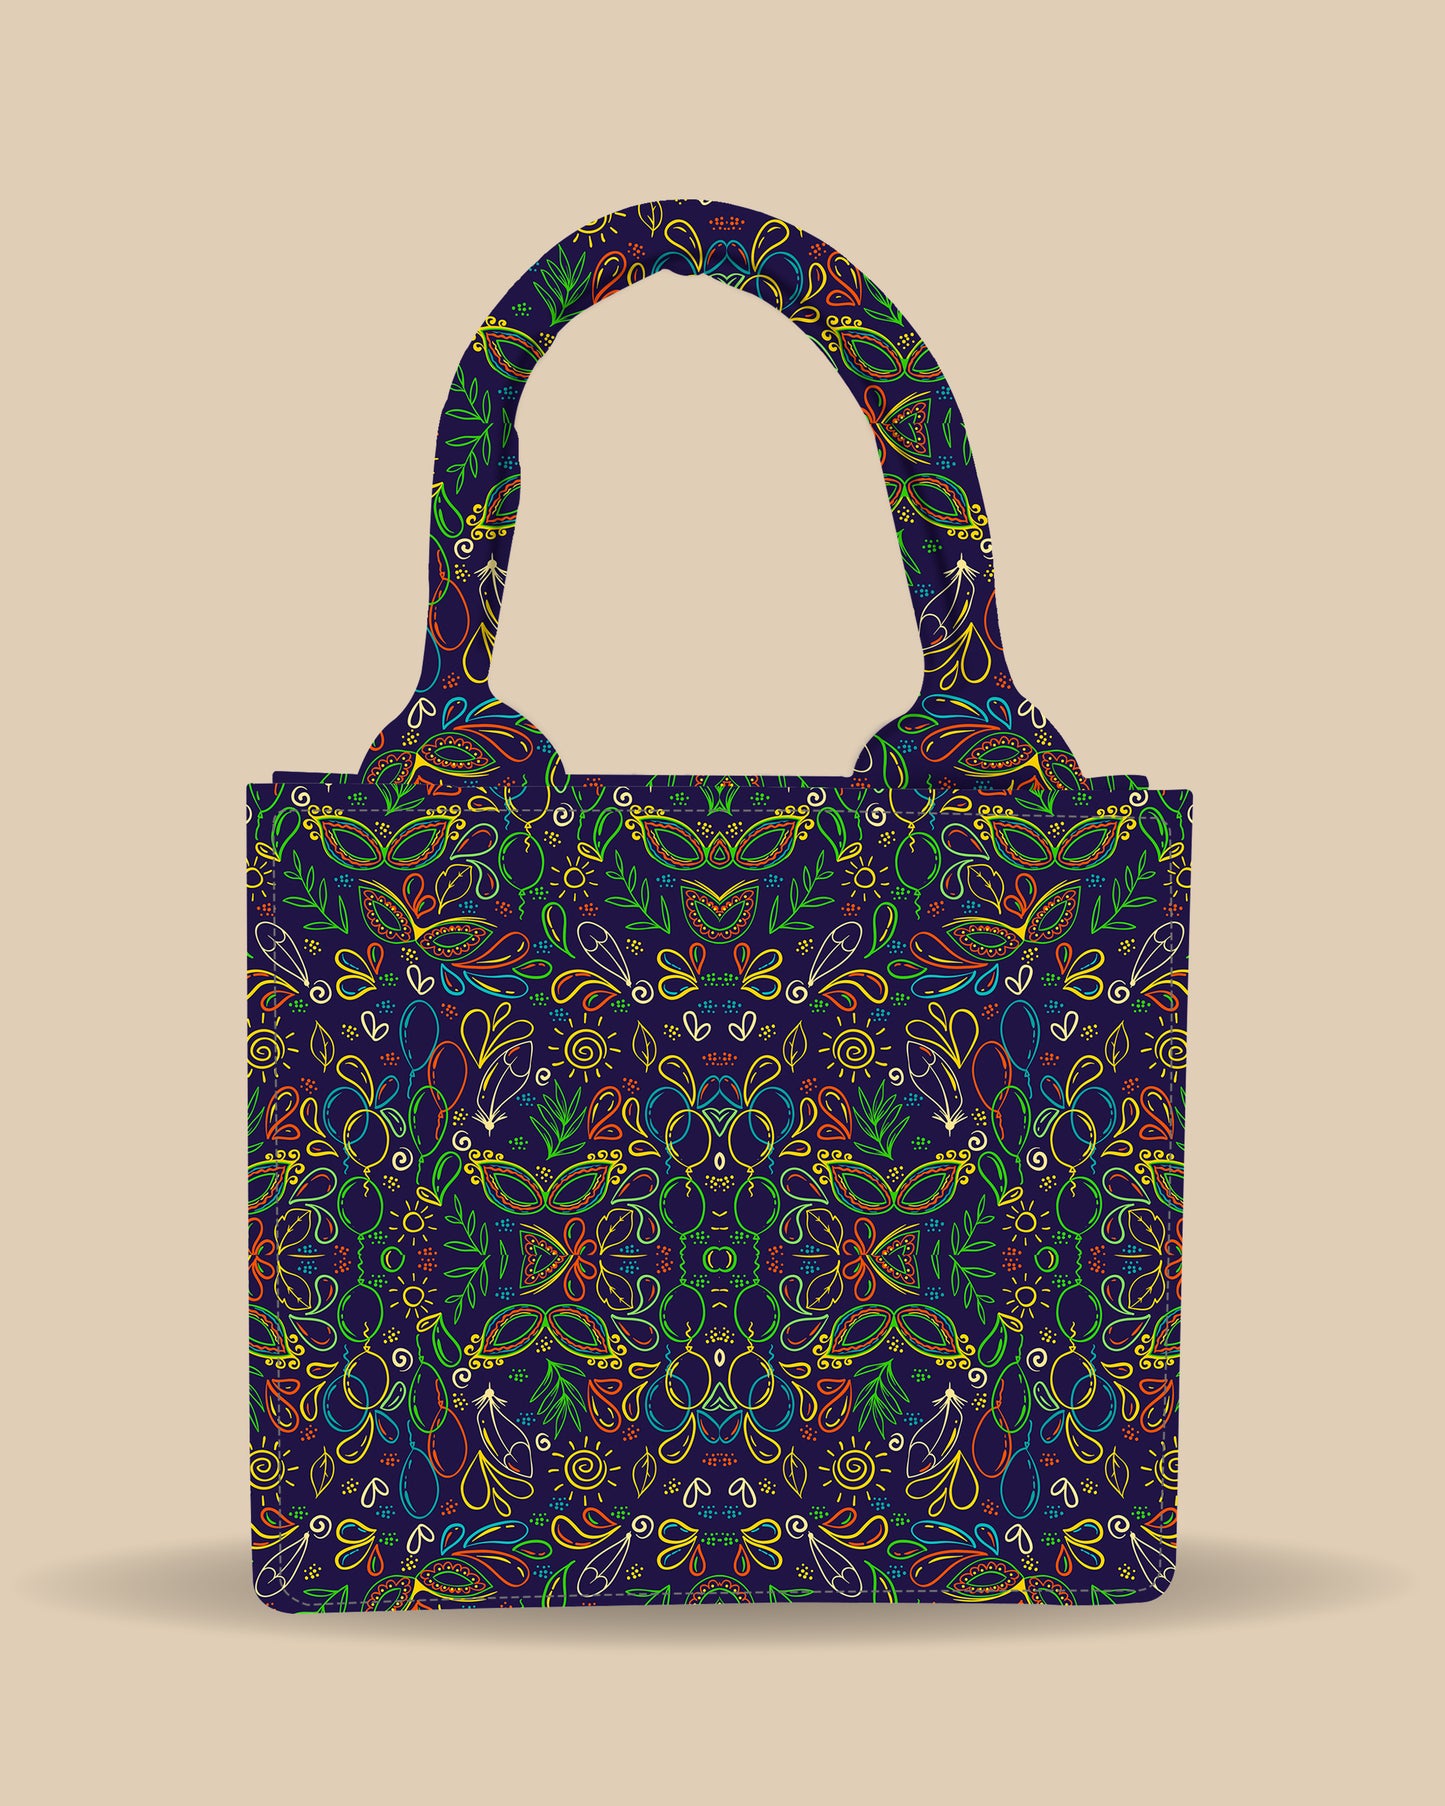 Customized Small Tote Bag Designed with Brazilian Carnival Pattern